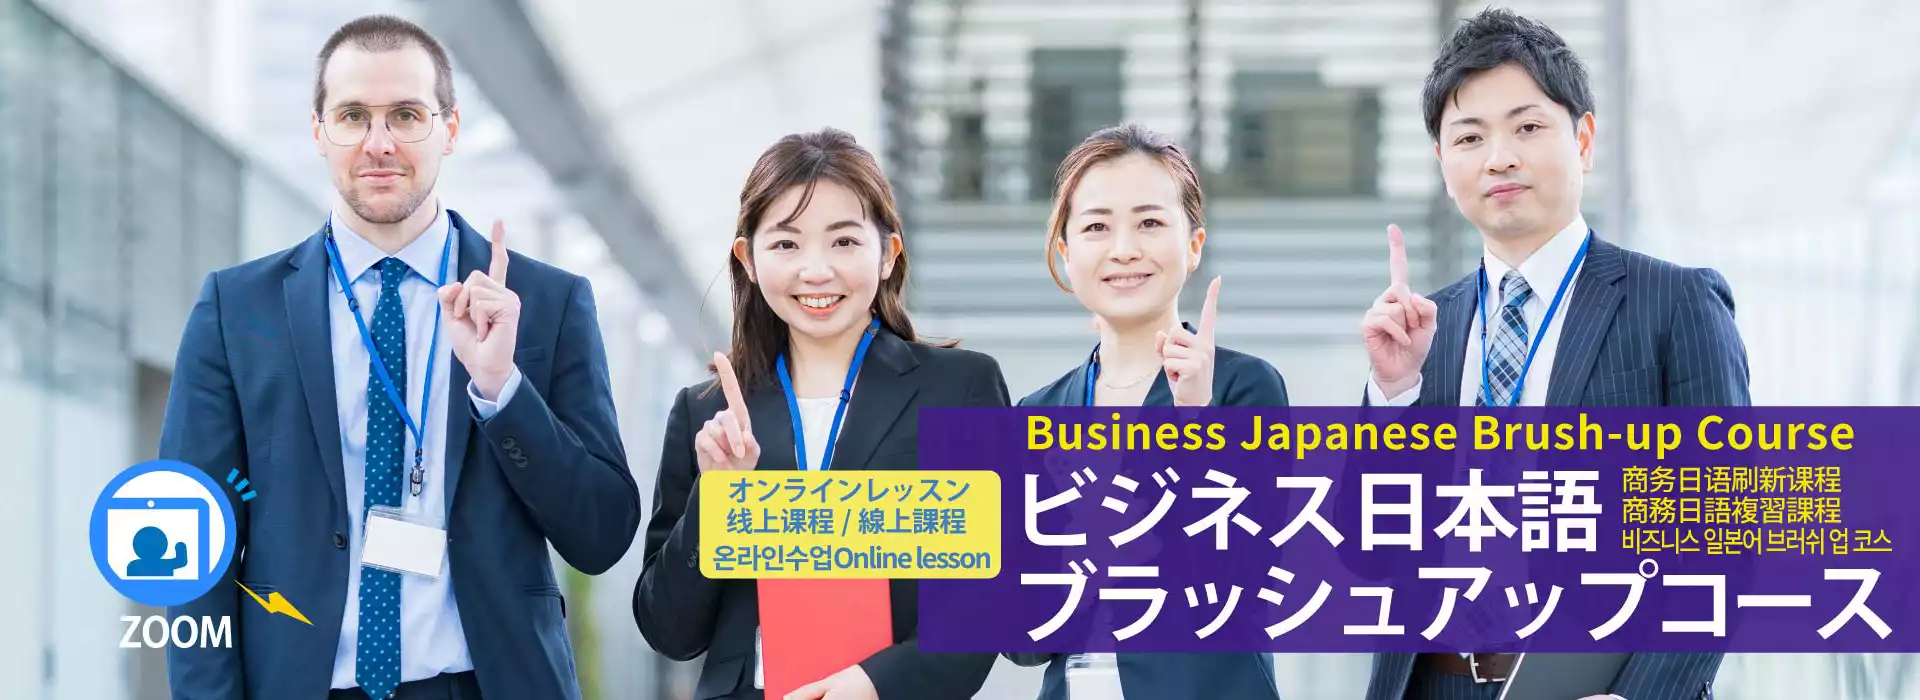 Business Japanese Brush-up Course (Online Lessons)